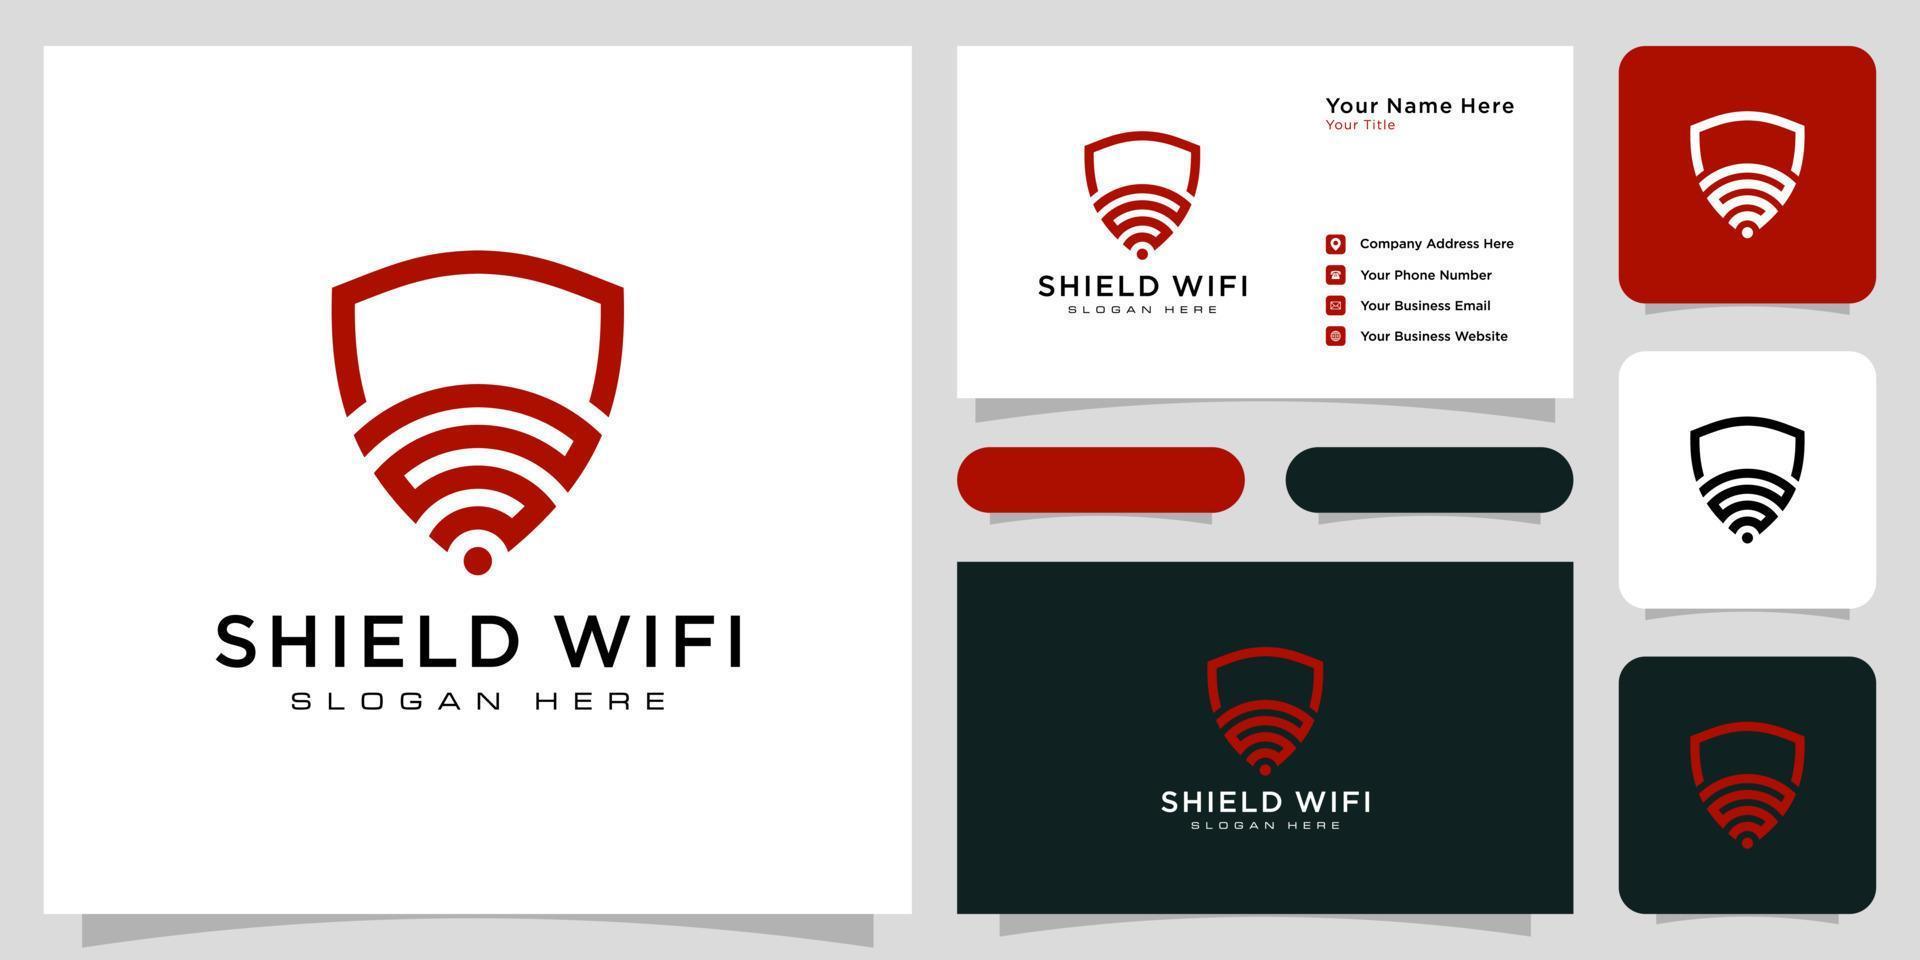 Shield wifi logo design and business card vector